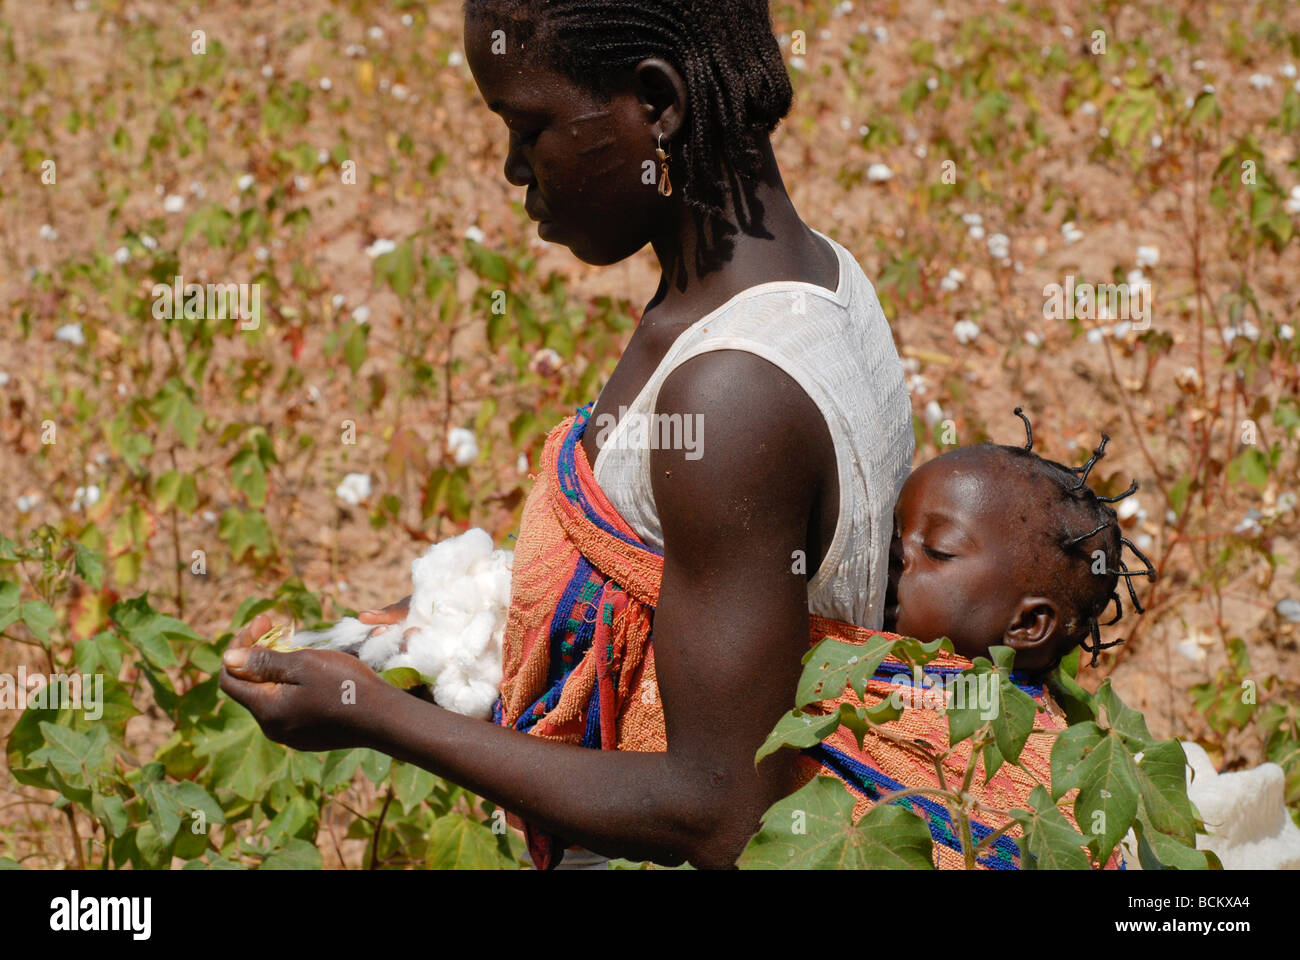 West Africa Burkina Faso , fairtrade and organic cotton project , woman with baby harvest cotton at farm Stock Photo